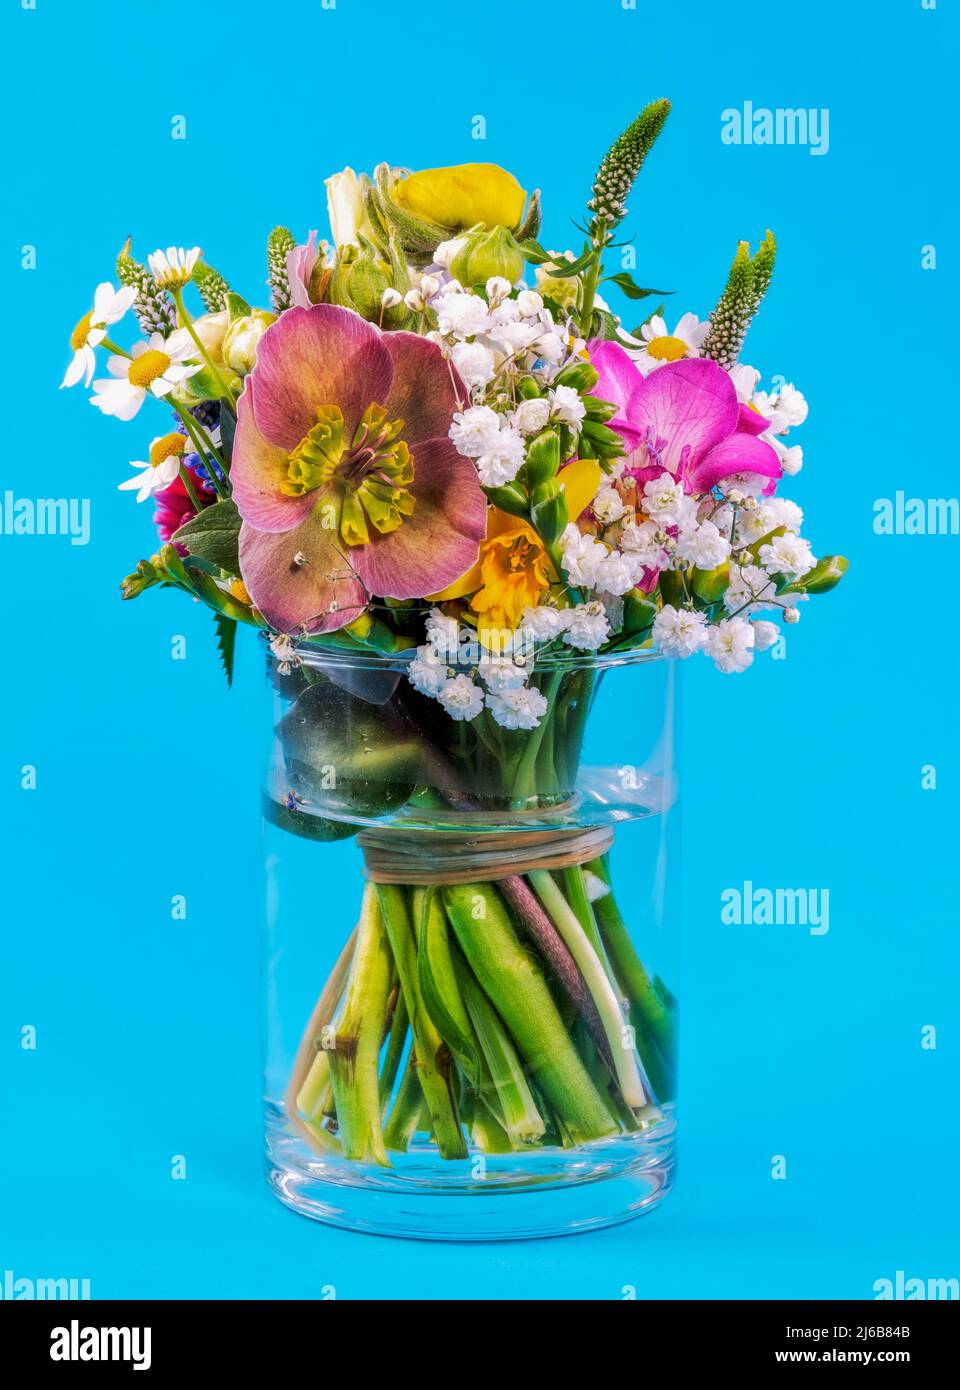 Closeup of a spring flower arrangement in a glass vase Stock Photo - Alamy